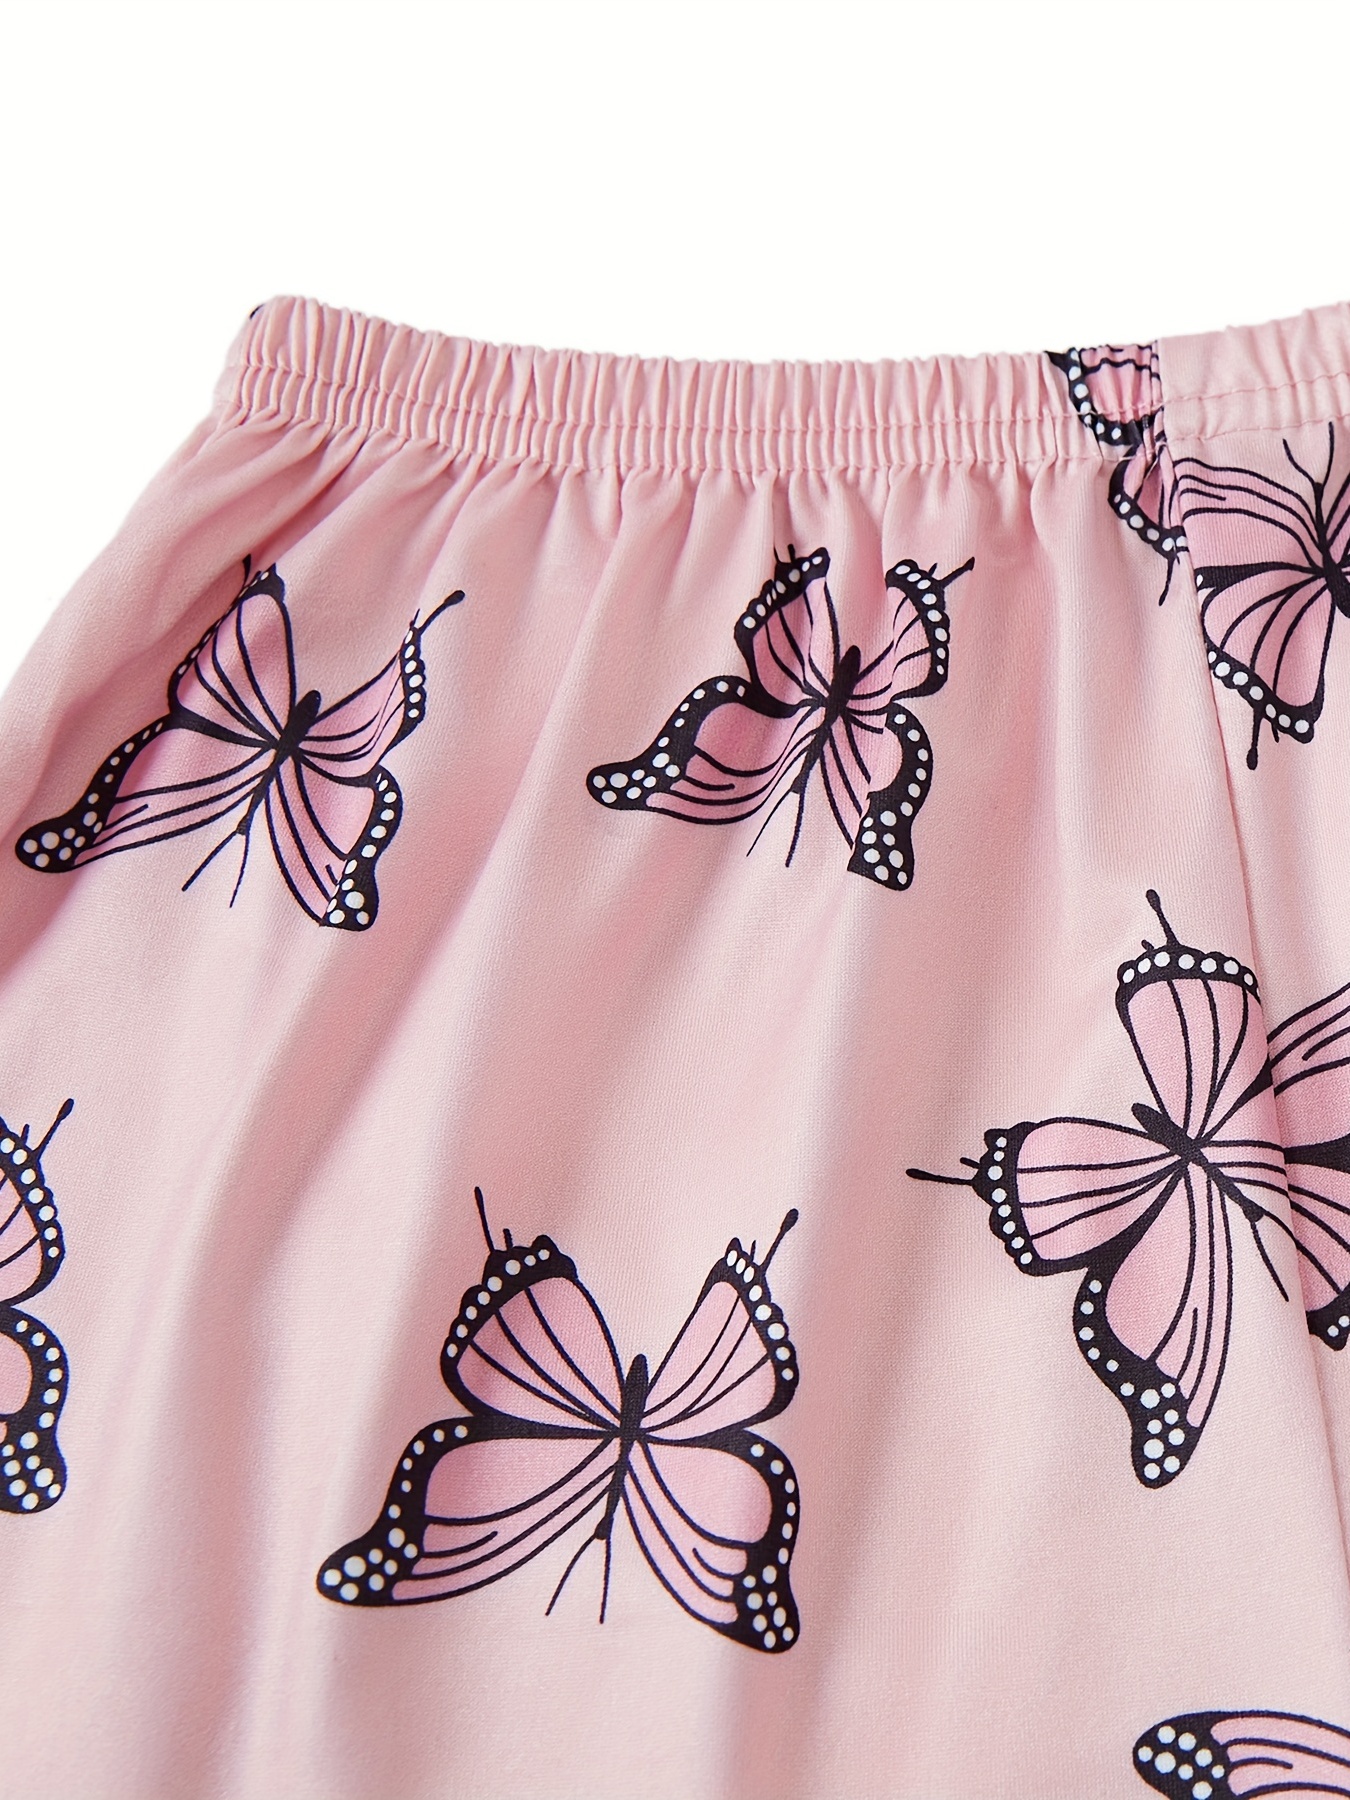 Pink Butterfly Sleep Shorts for Women Pajama Shorts with